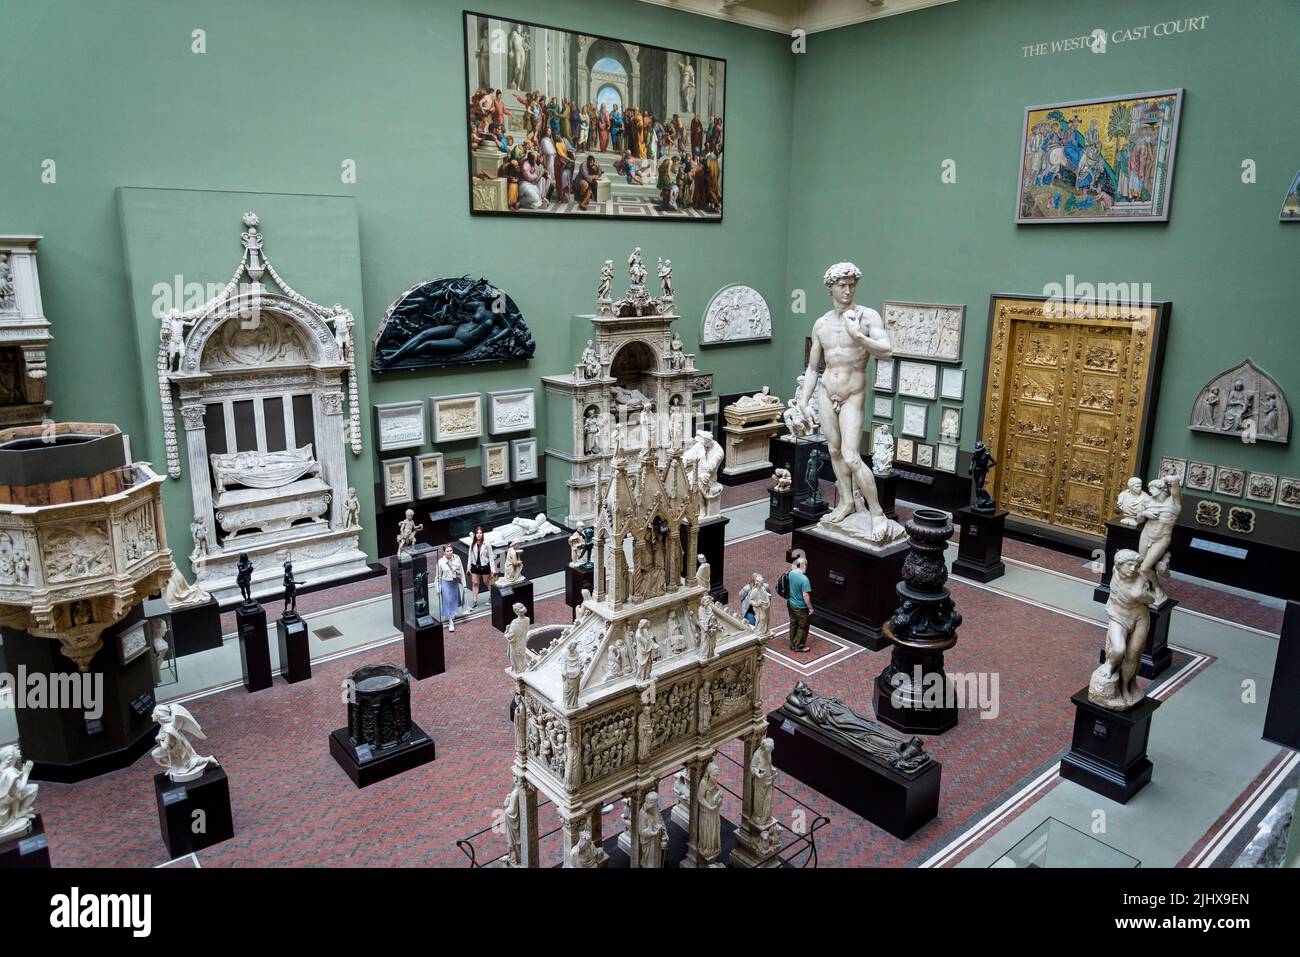 Michelangelo's David in the  Cast Collection, opened in 1873, the Cast Courts display copies of some of the world's most significant works of art repr Stock Photo